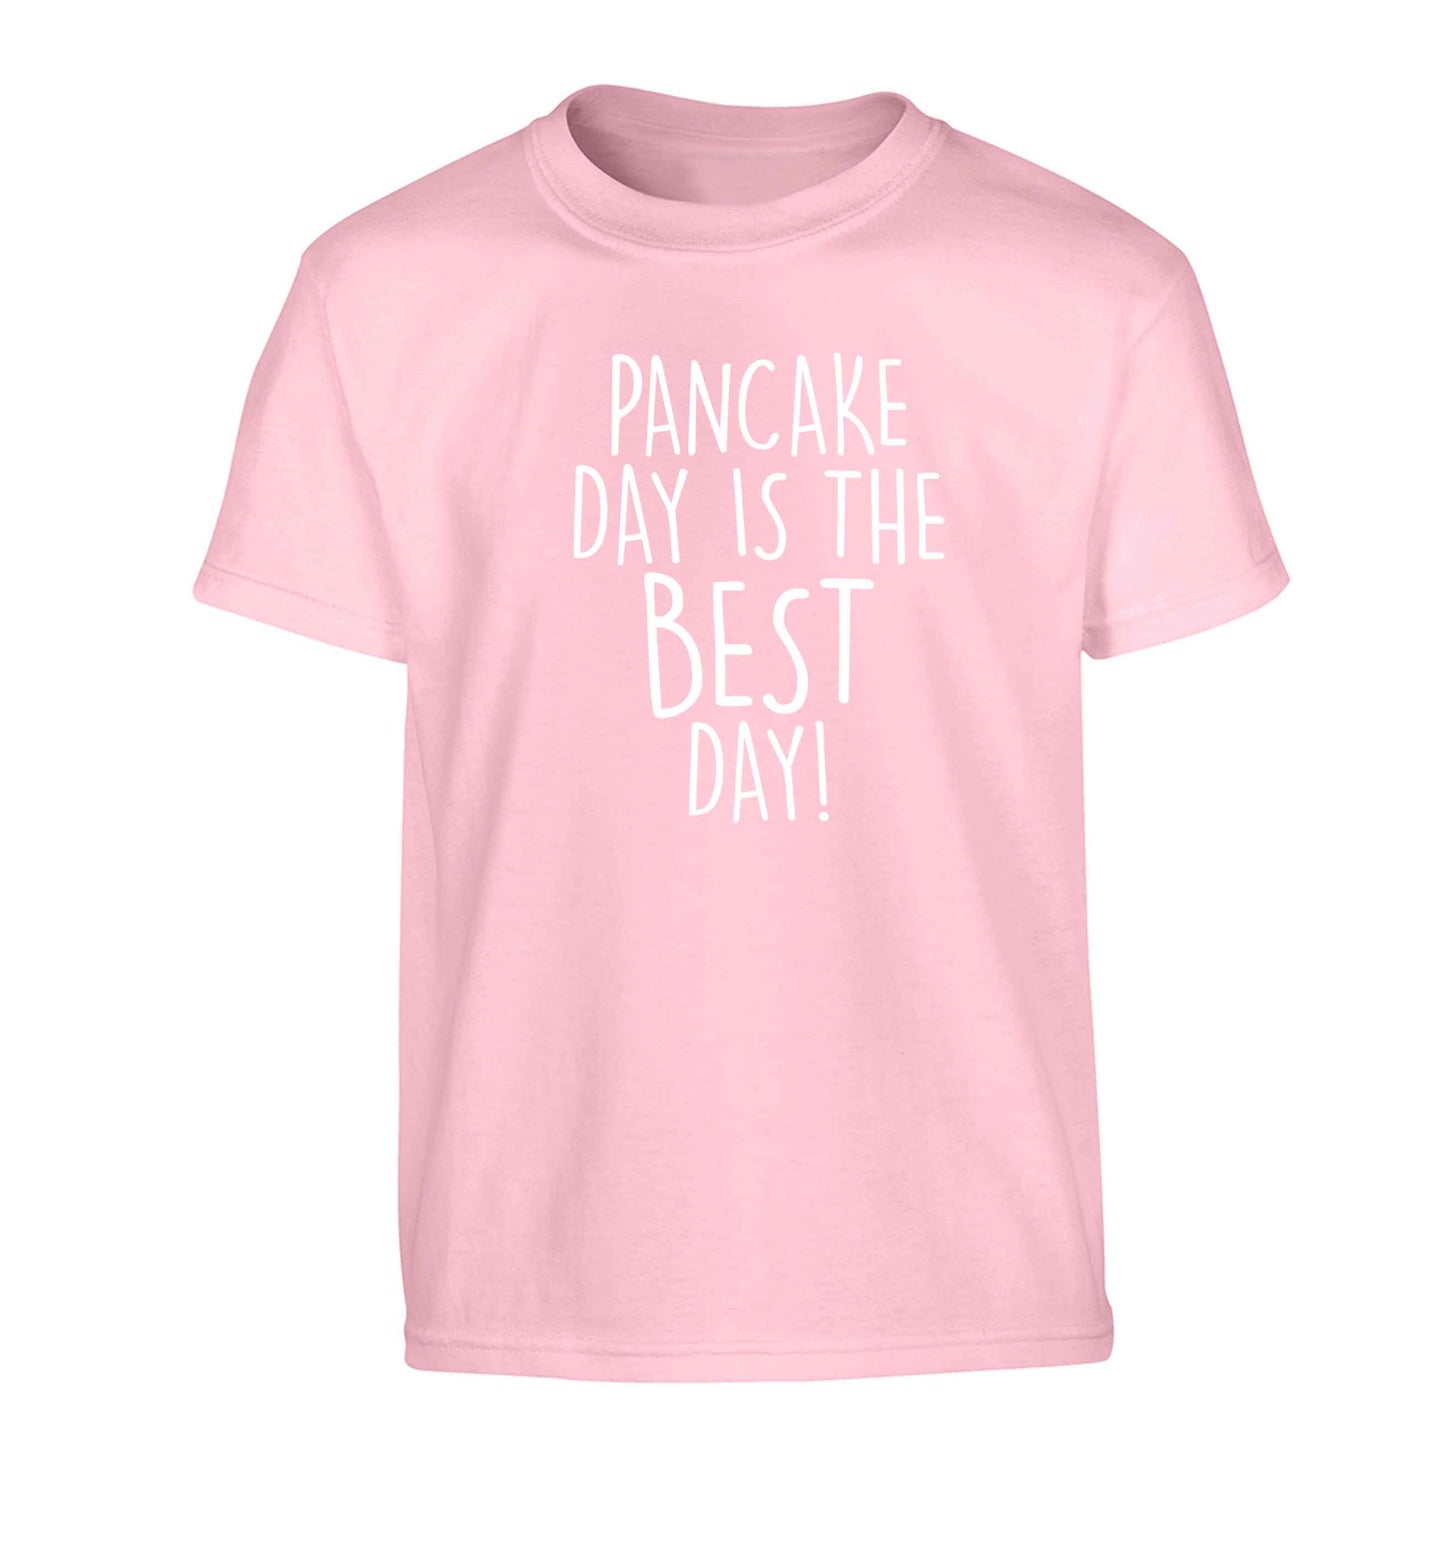 Pancake day is the best day Children's light pink Tshirt 12-13 Years